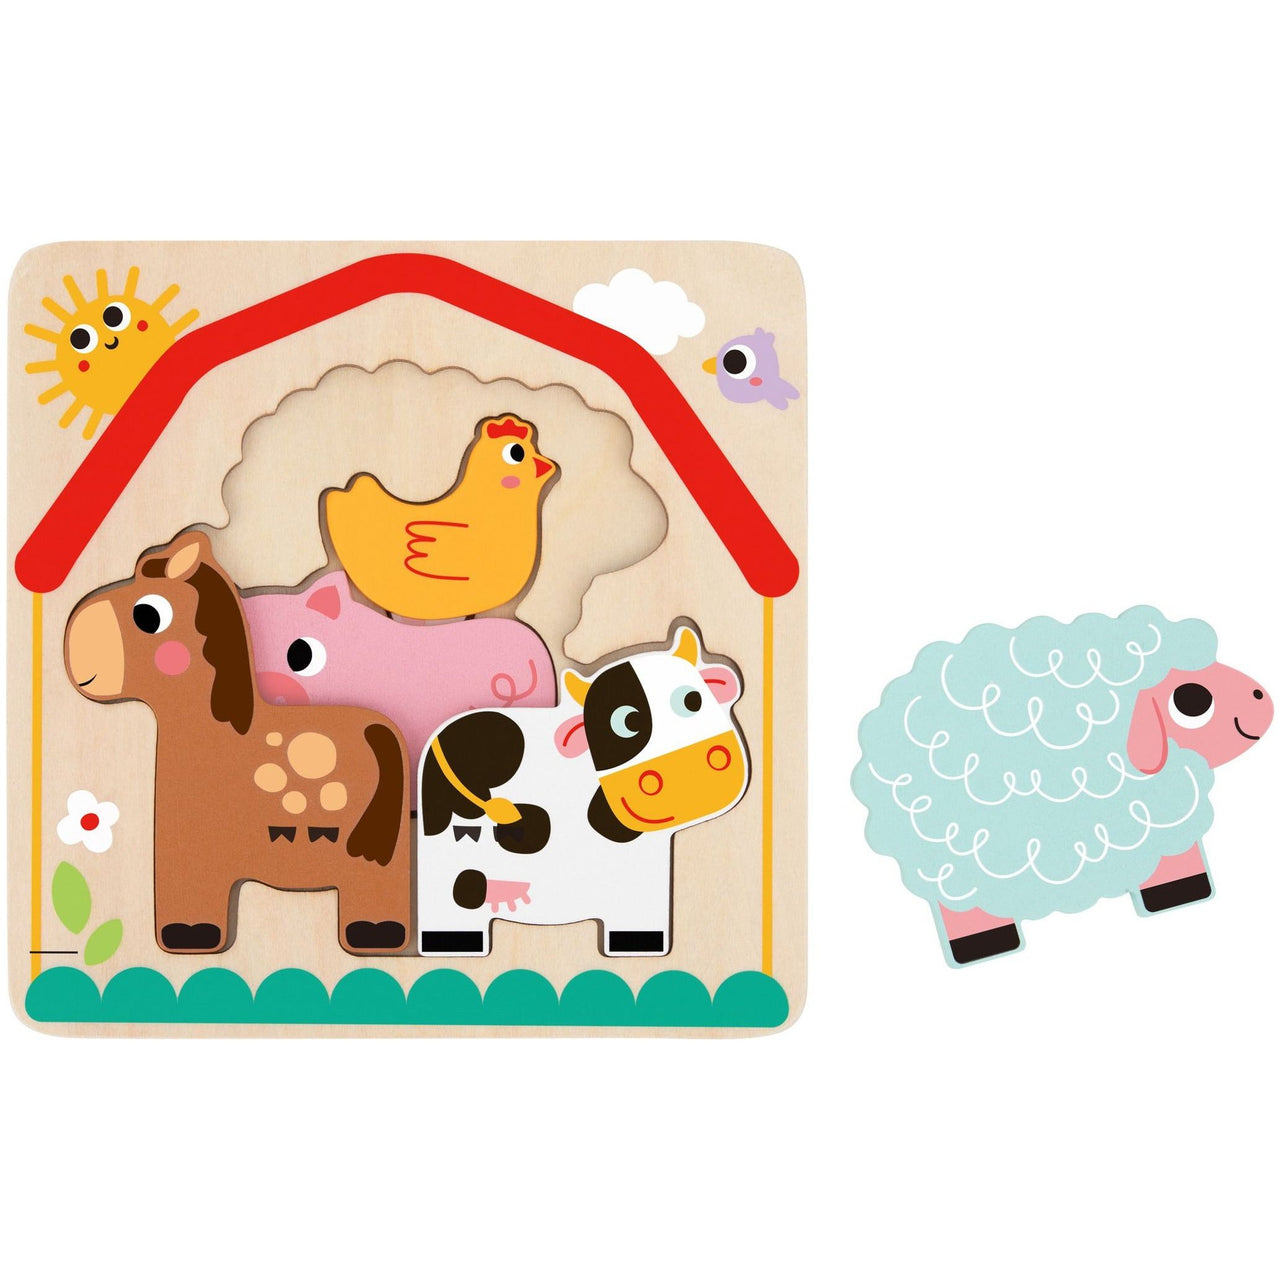 Tooky Toy Wooden Multi-Layered Farm Puzzle Tooky Toy